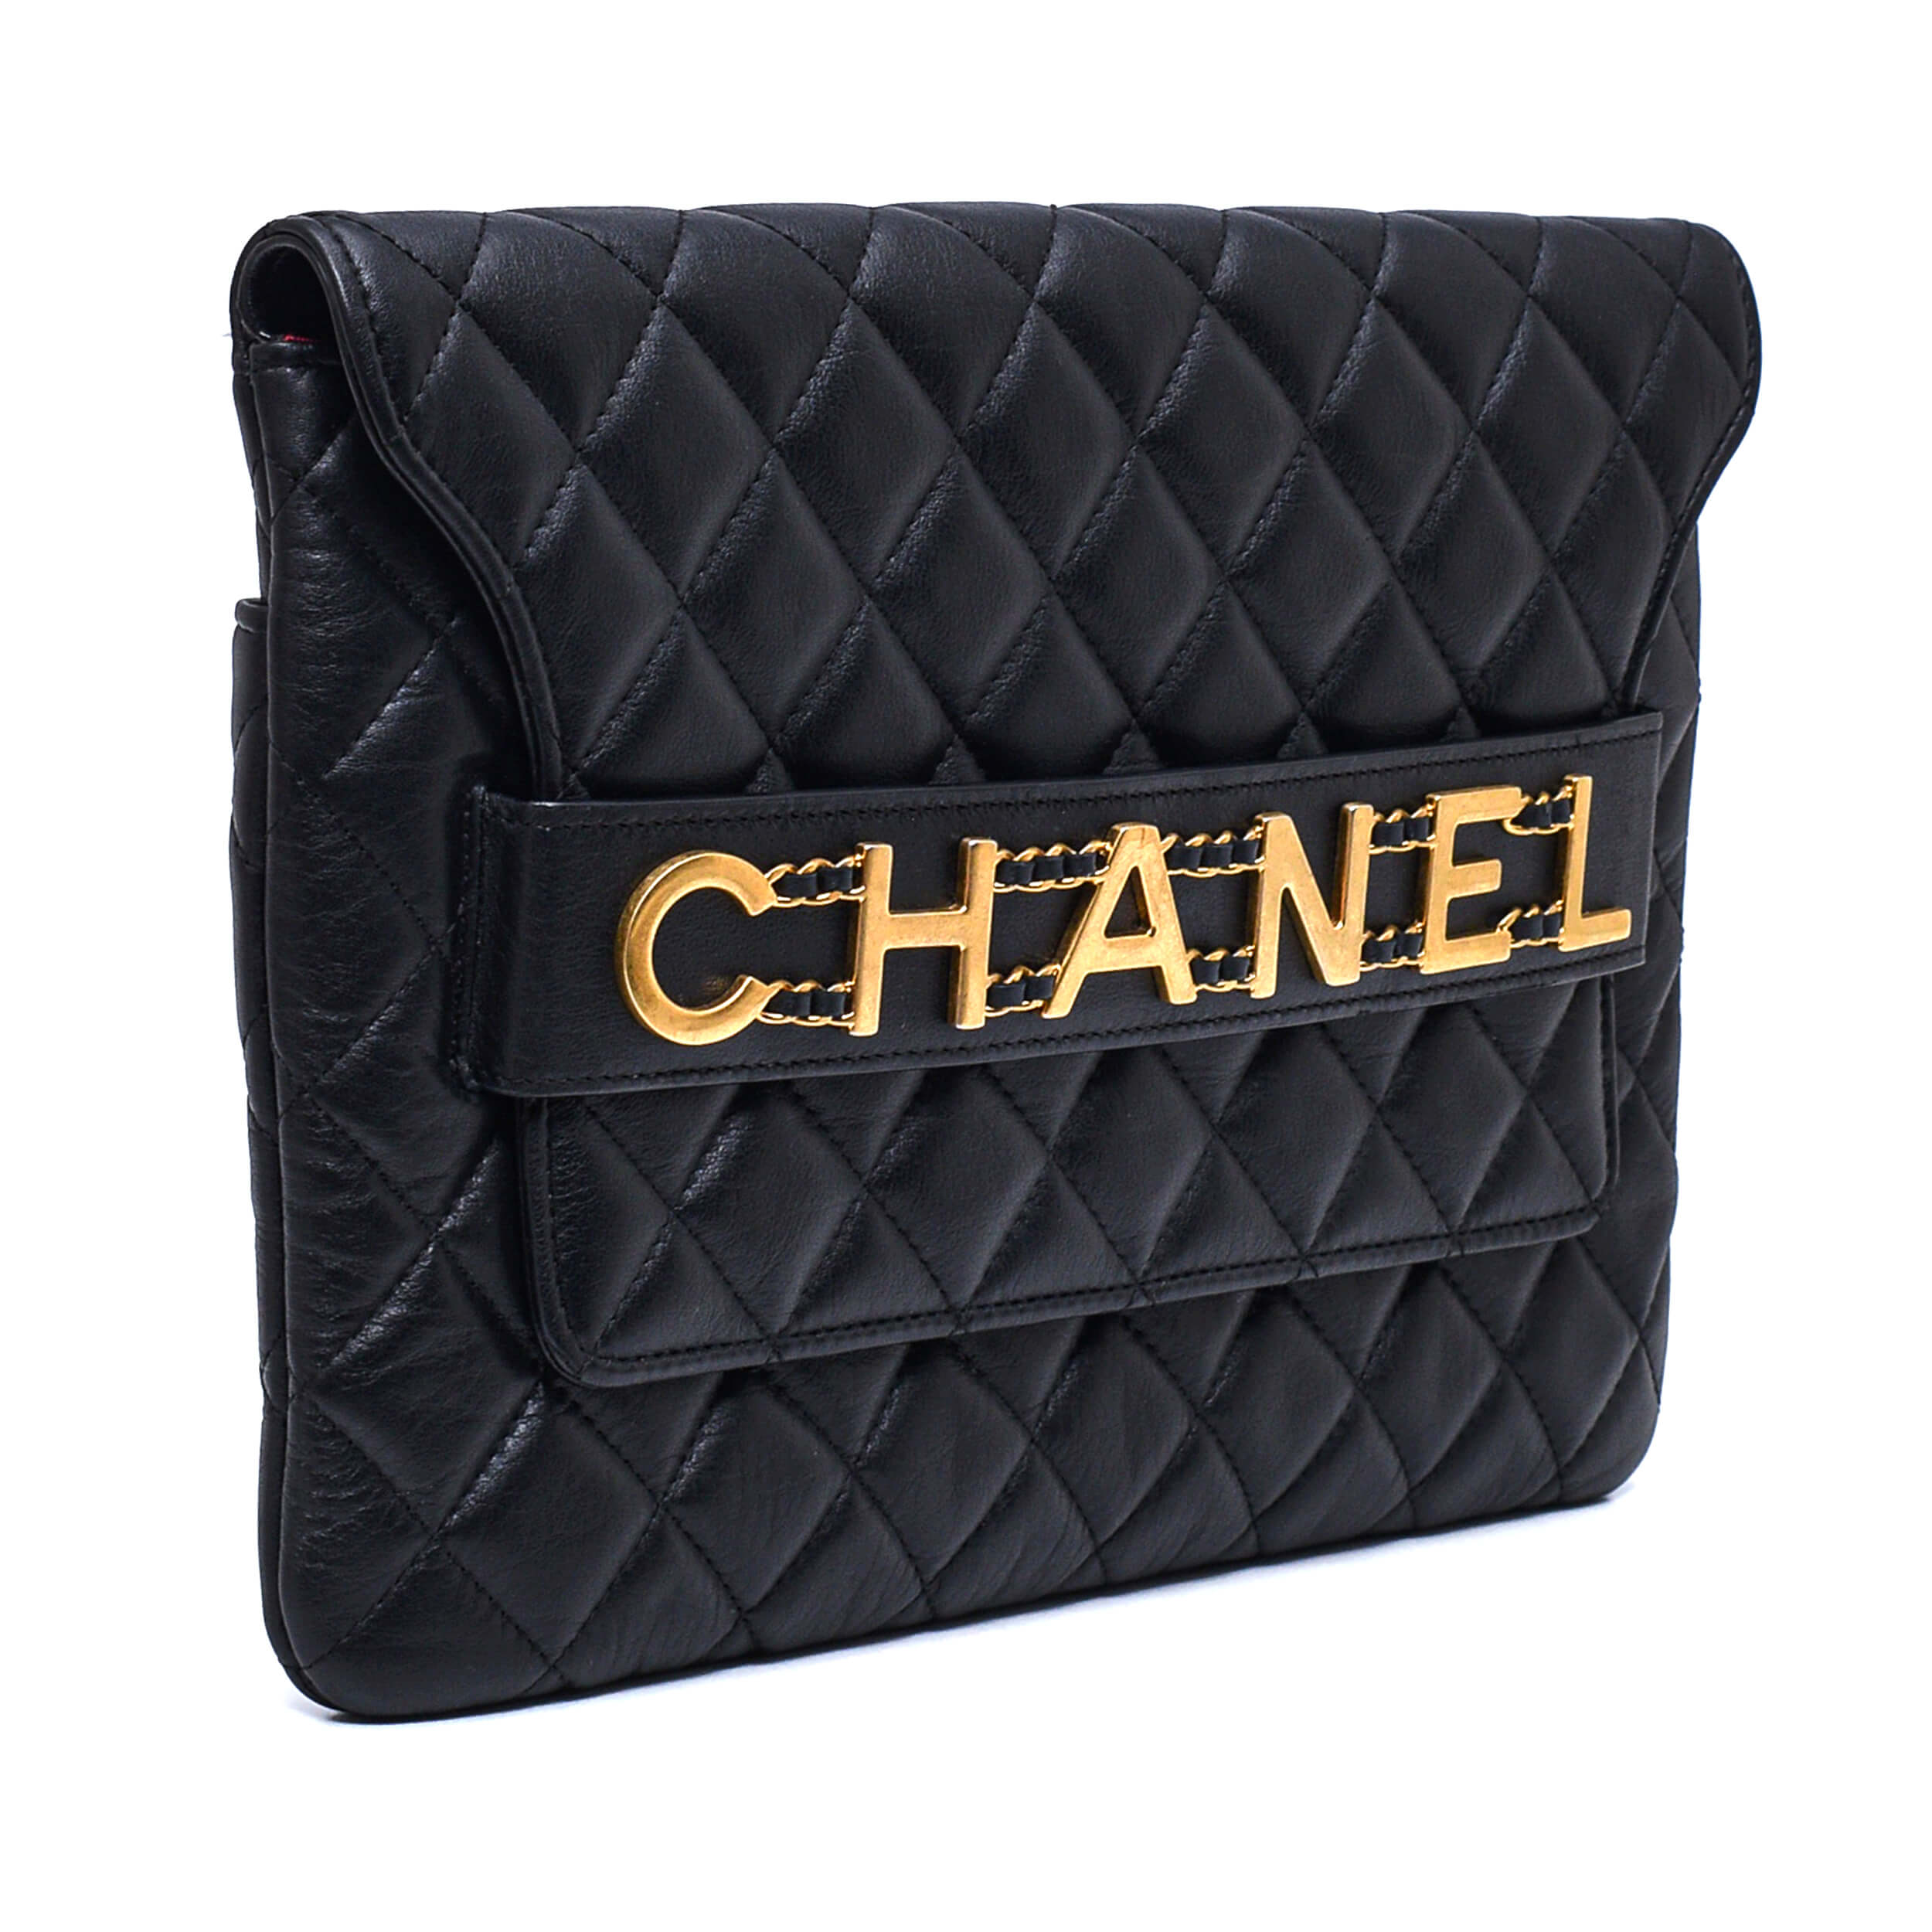 Chanel - Black Calfskin Quilted Front Logo Enchained Clutch